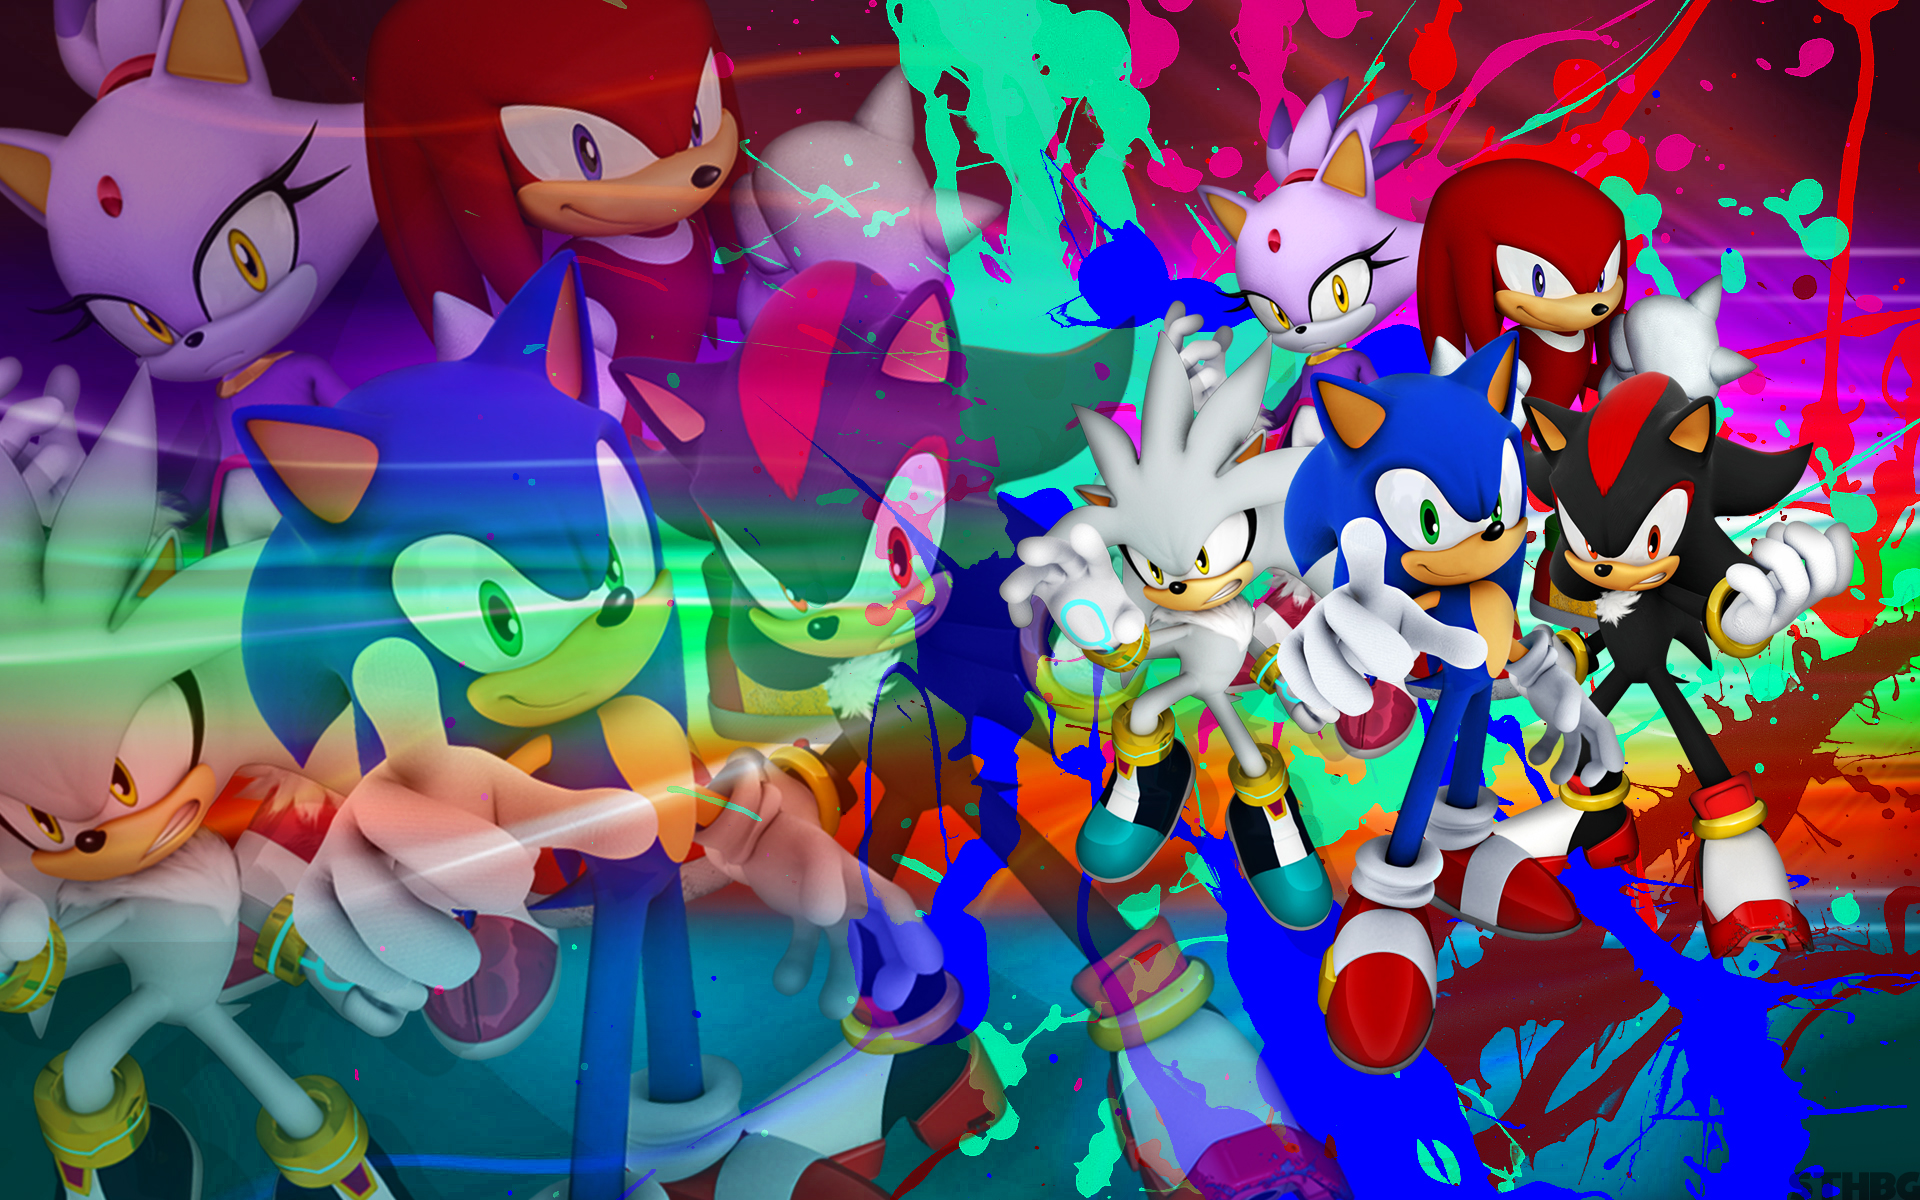 Sonic, Shadow, Knuckles and Silver collage by NinHitFan2000 on DeviantArt